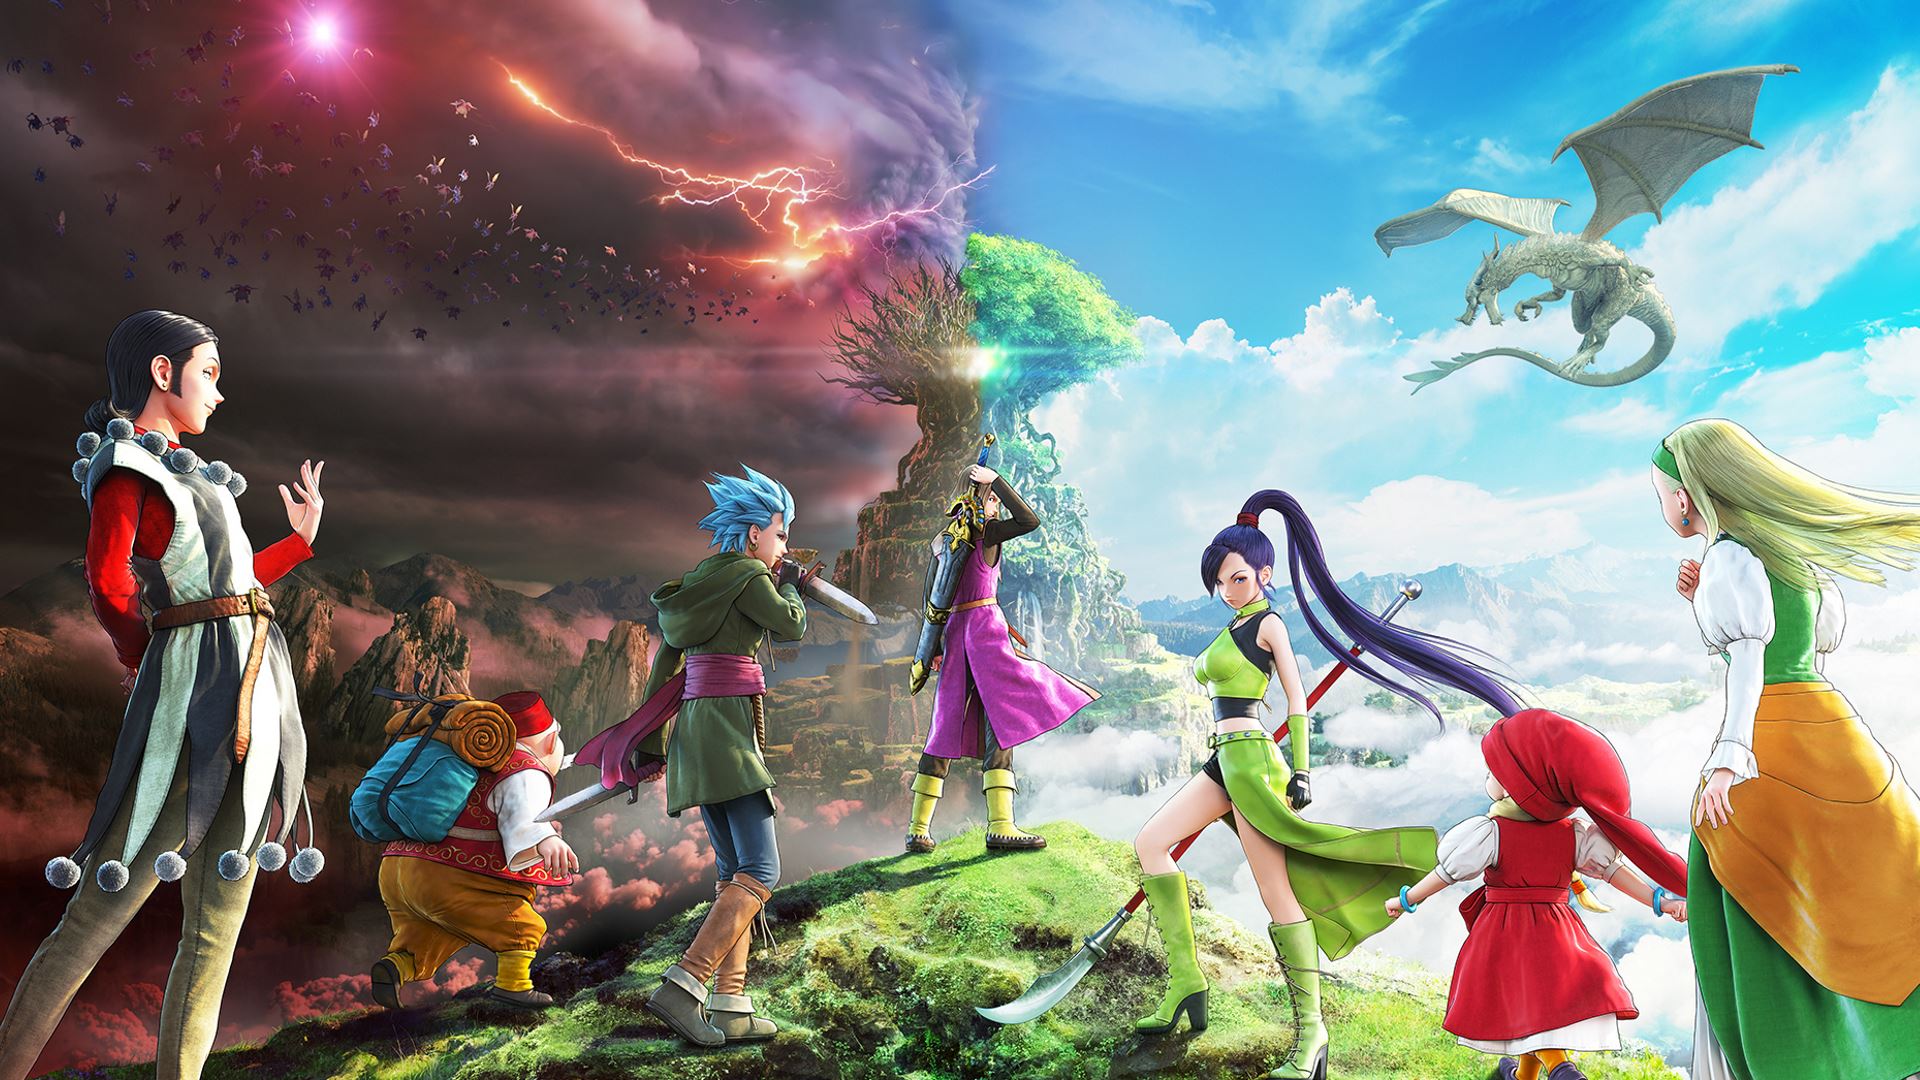 Dragon Quest 3 Remake Platforms: Is it coming to PS5, Xbox Series